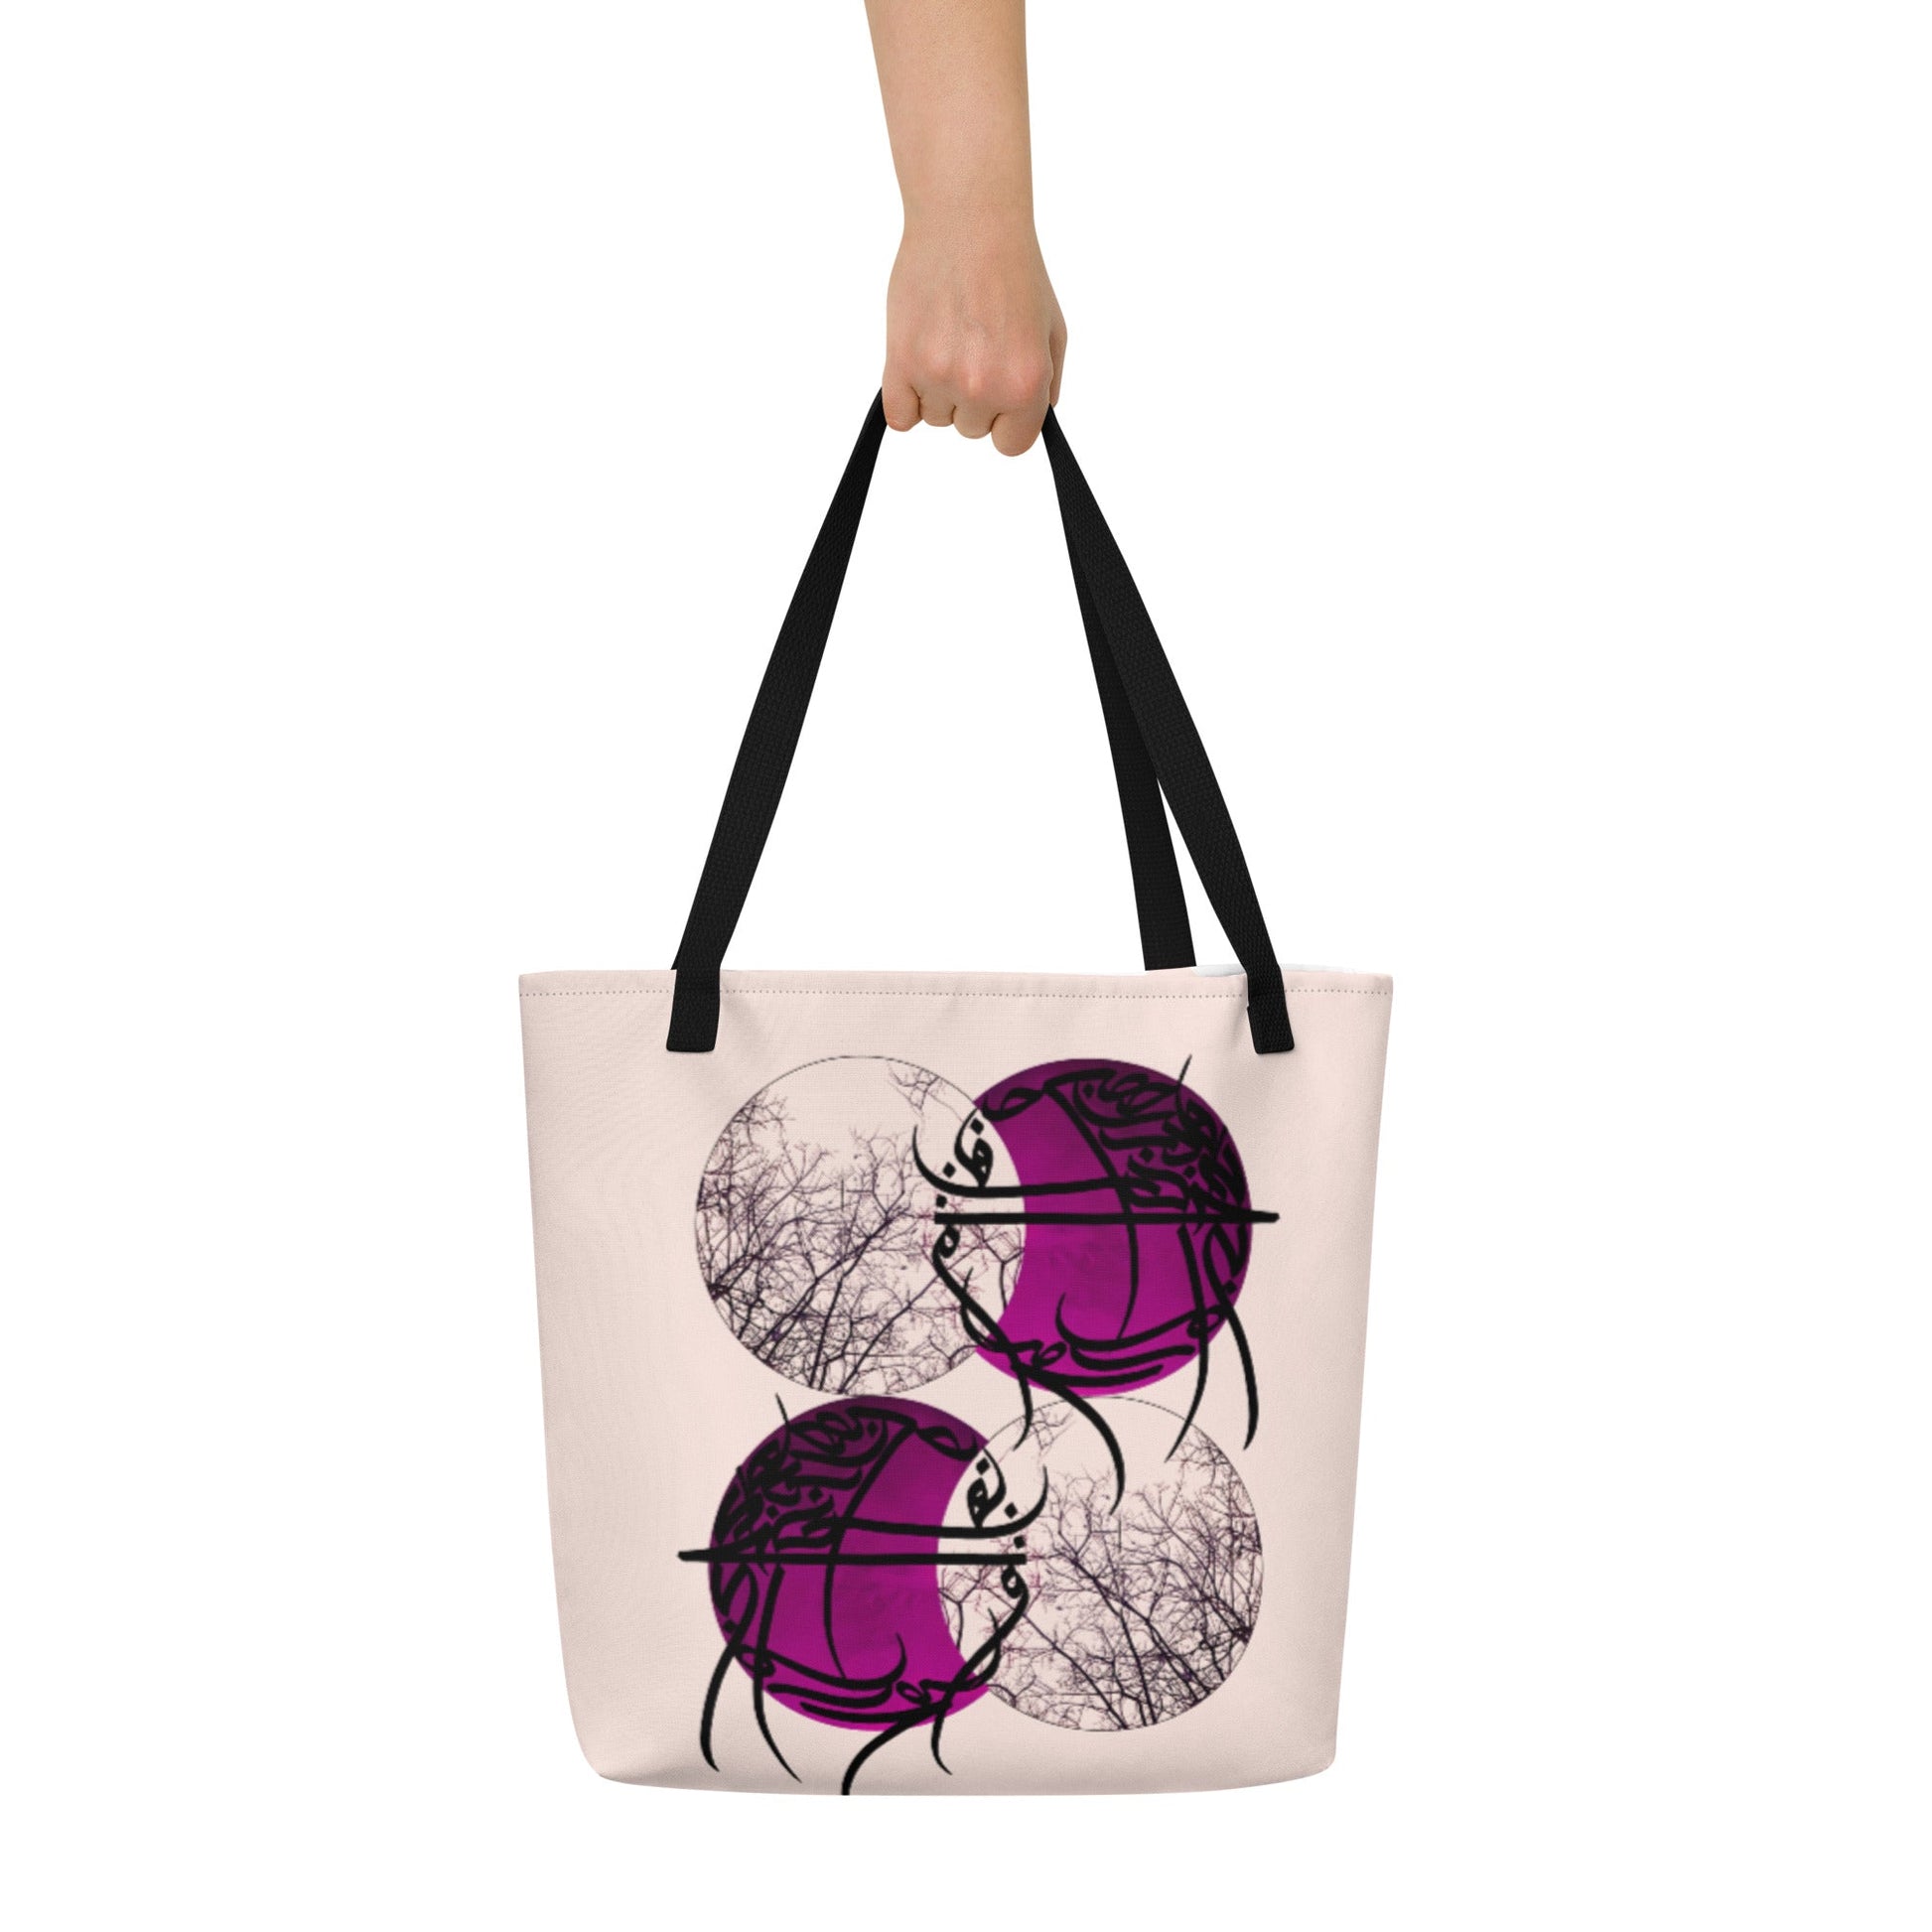 Tent Session | All-Over Print Large Tote Bag - Bonotee